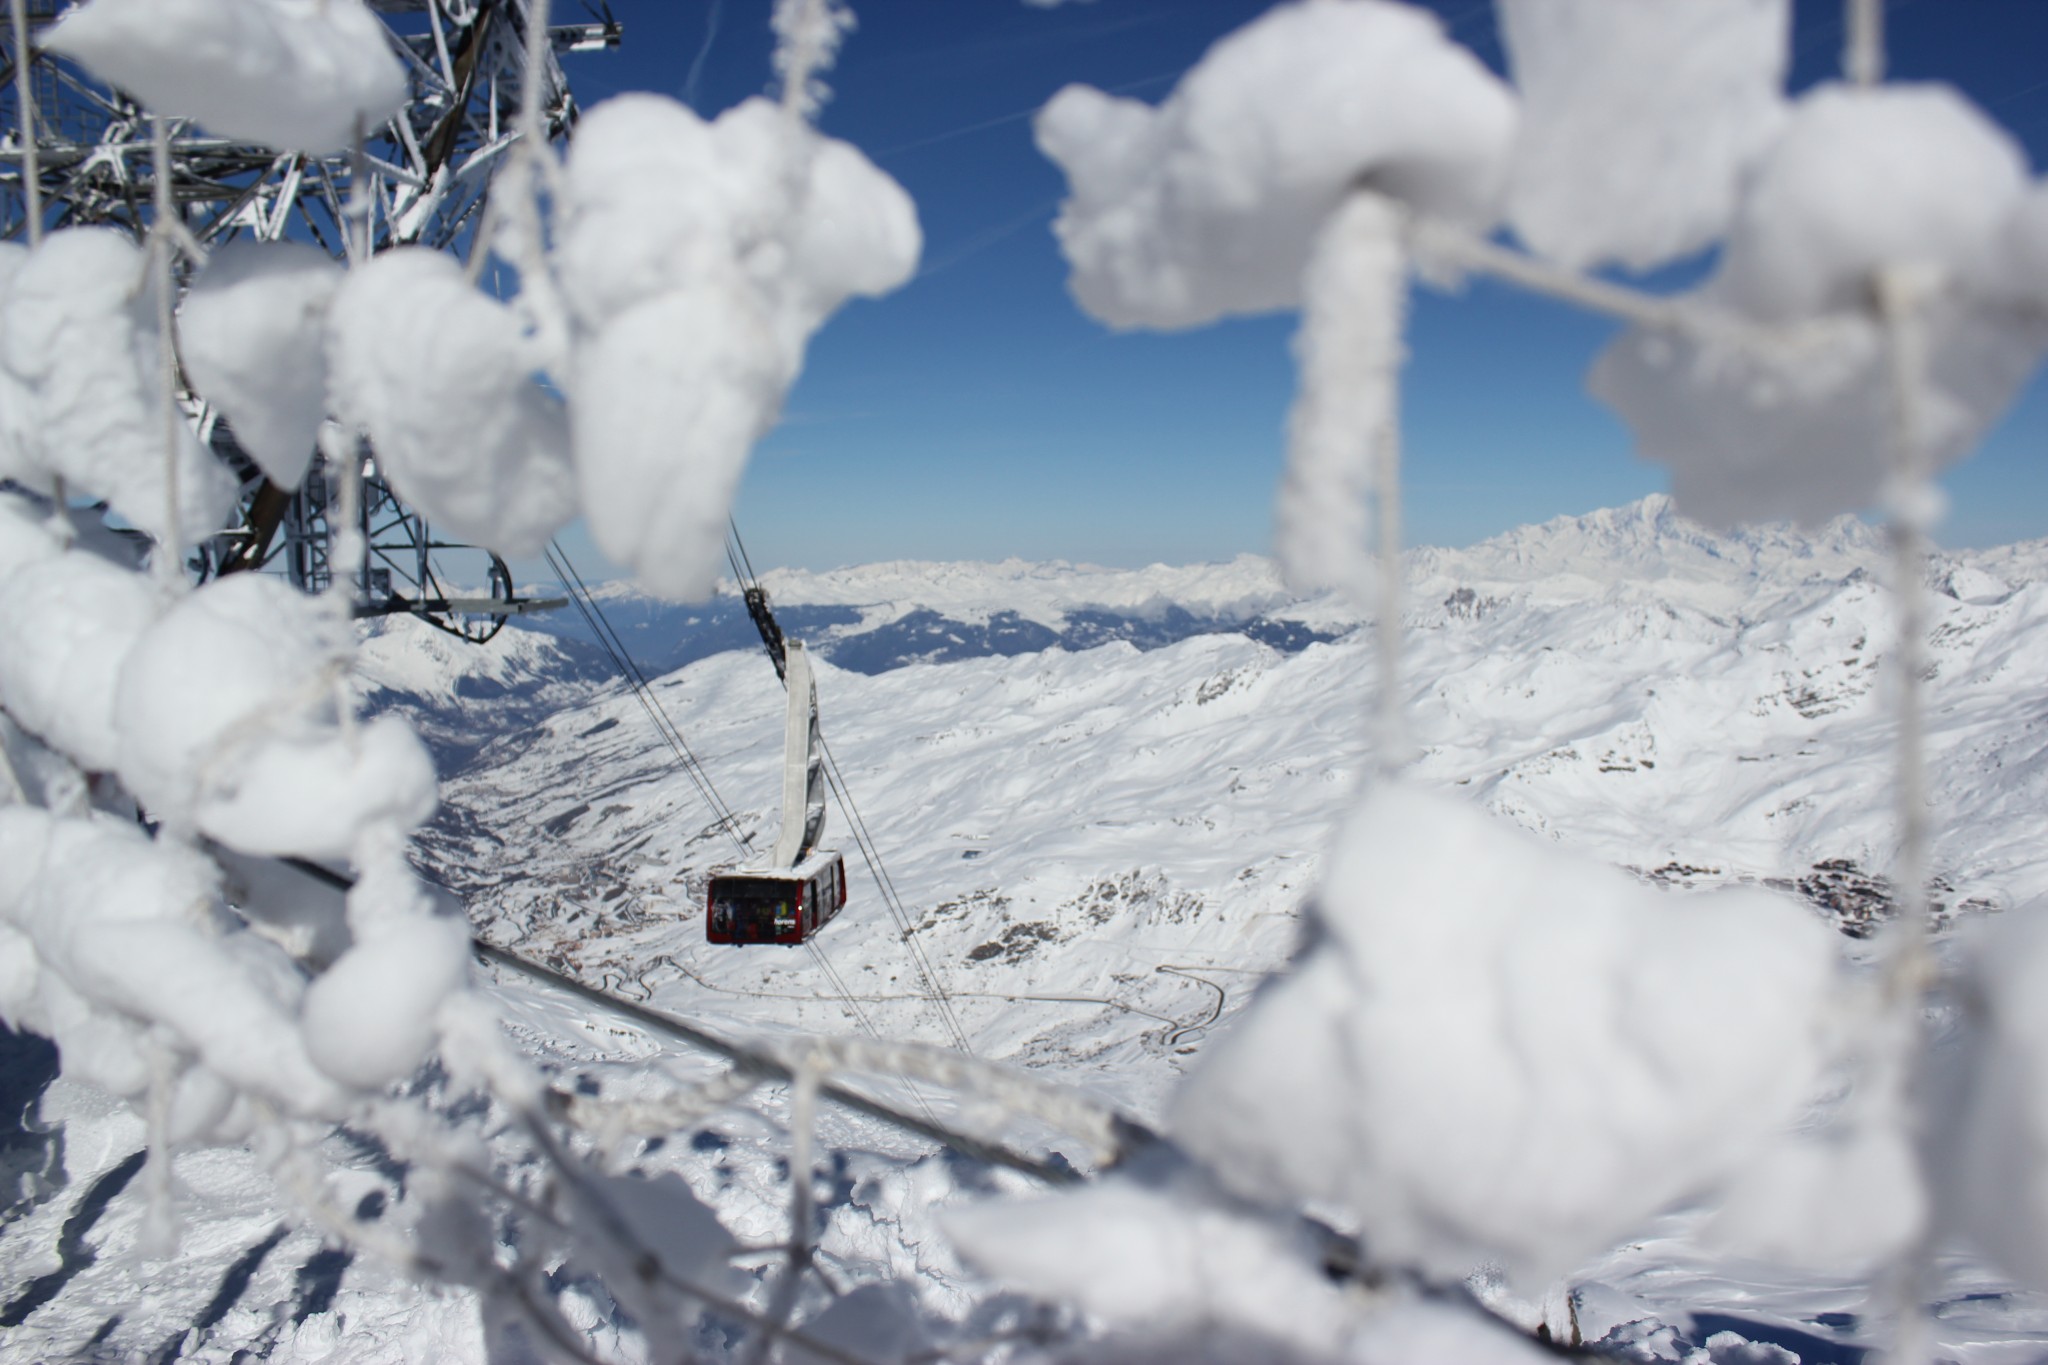 8 Things To Do In Val Thorens